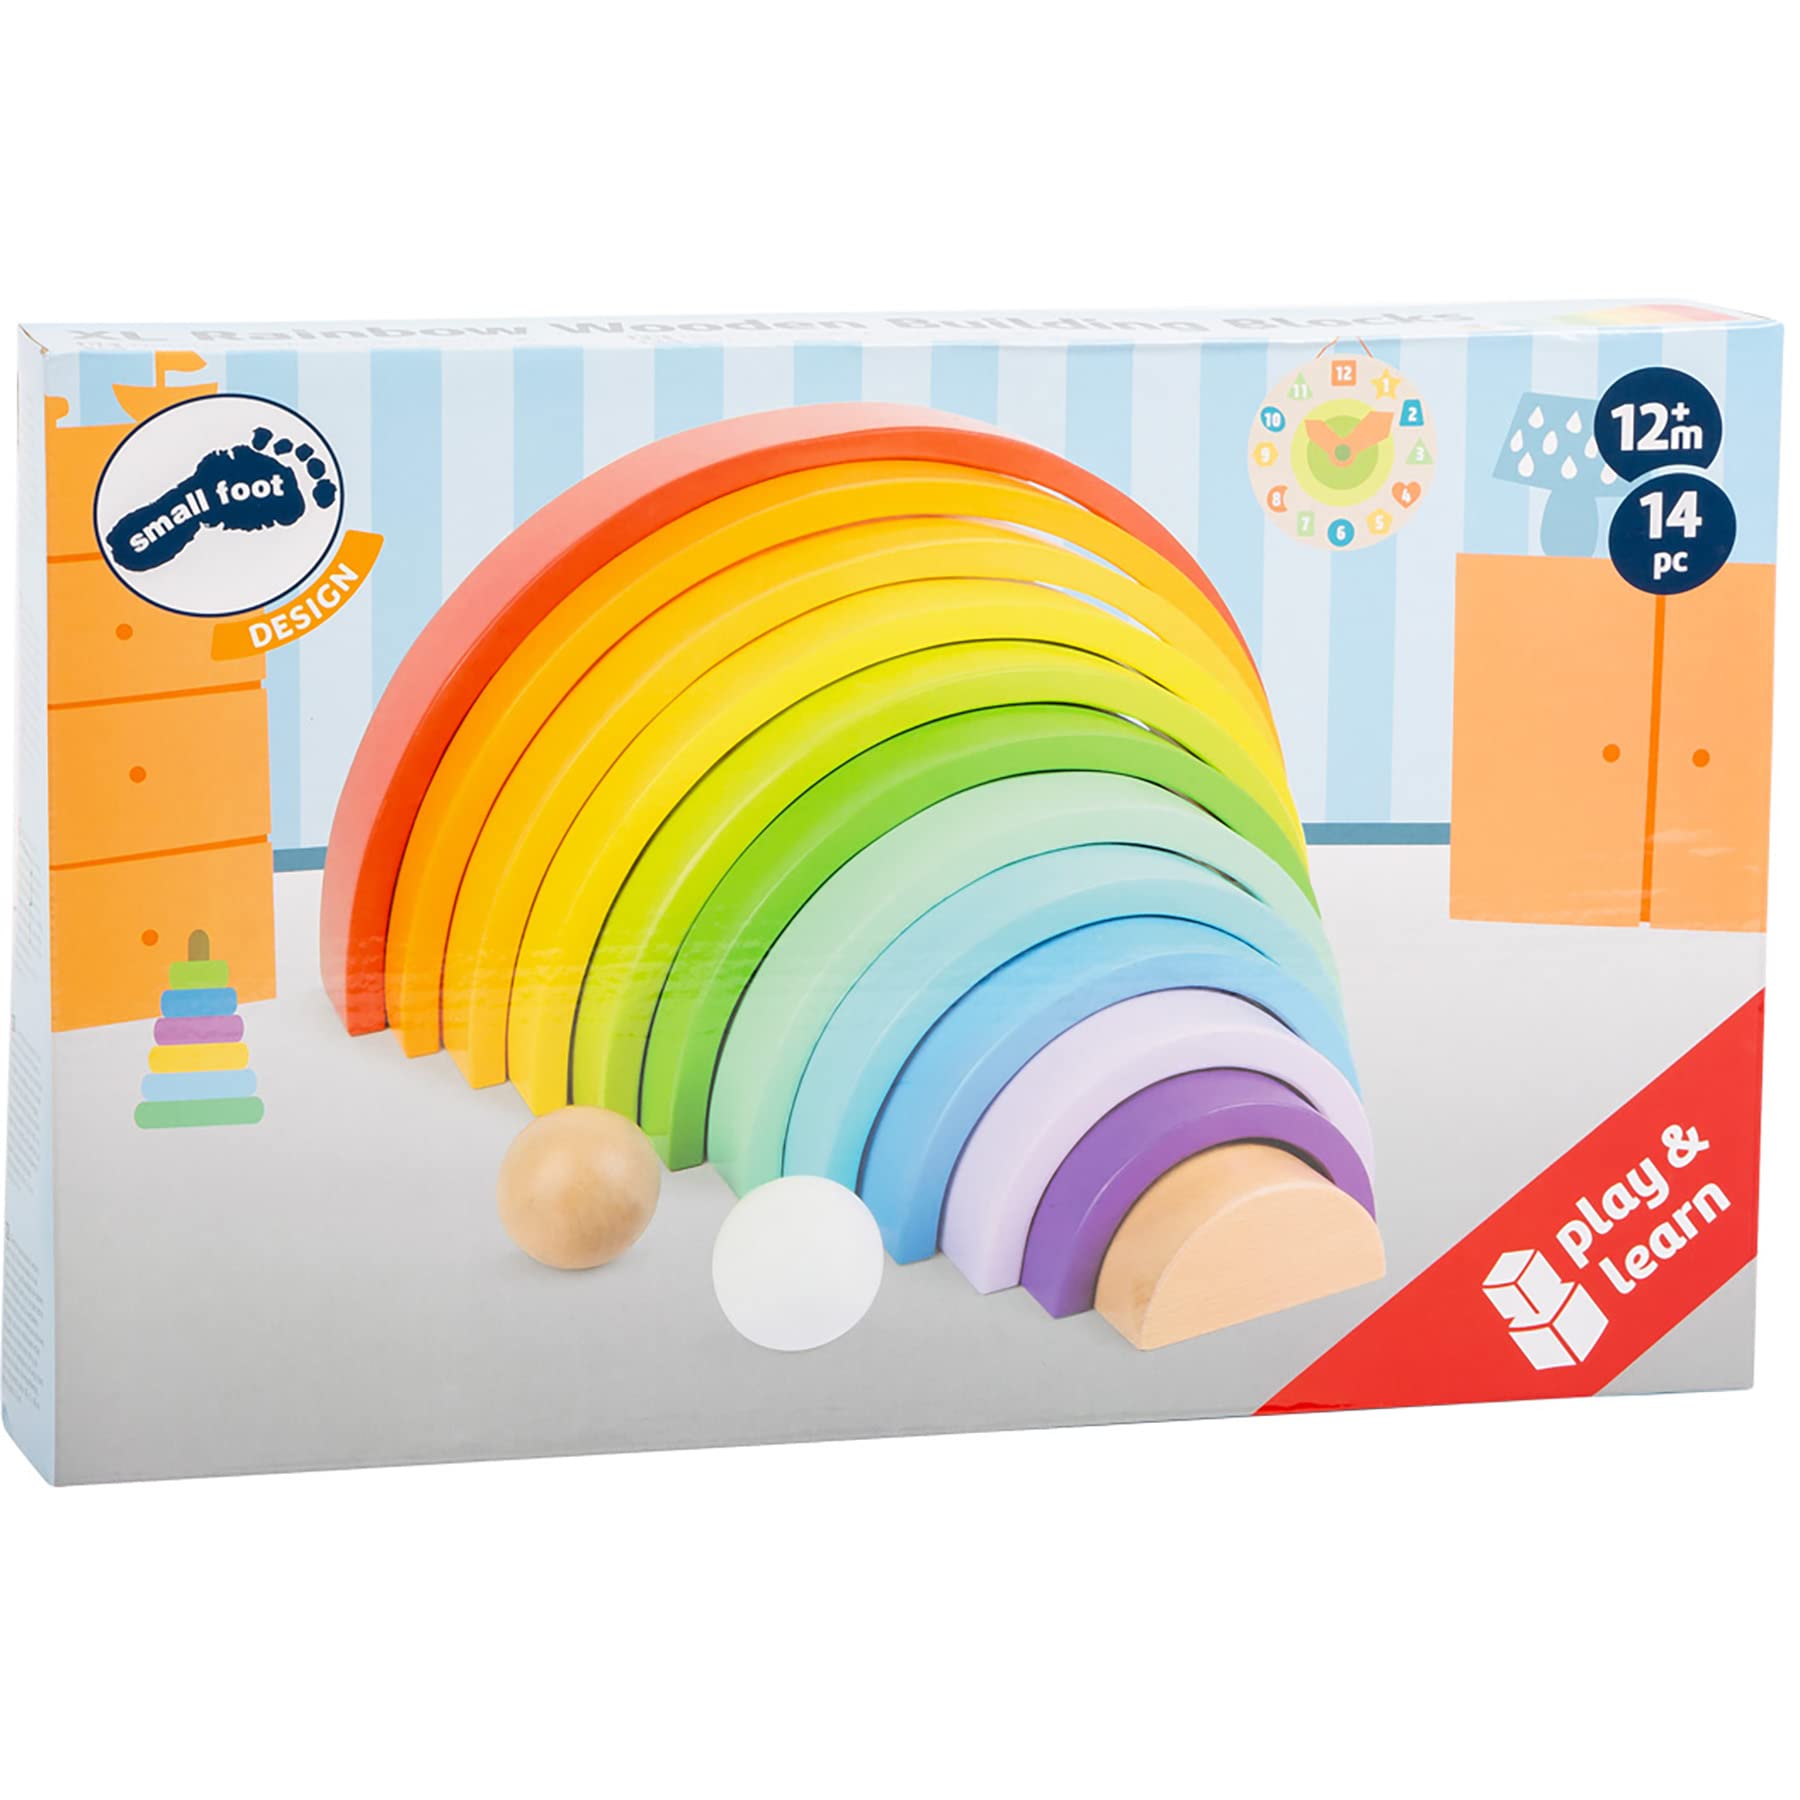 Wooden Rainbow Building Blocks with Balls (XL) by Small Foot – Babies Learn Hand-Eye Coordination, Patterns & Colors While Developing Fine Motor Skills – Educational Game for Toddlers – Age 12+ months